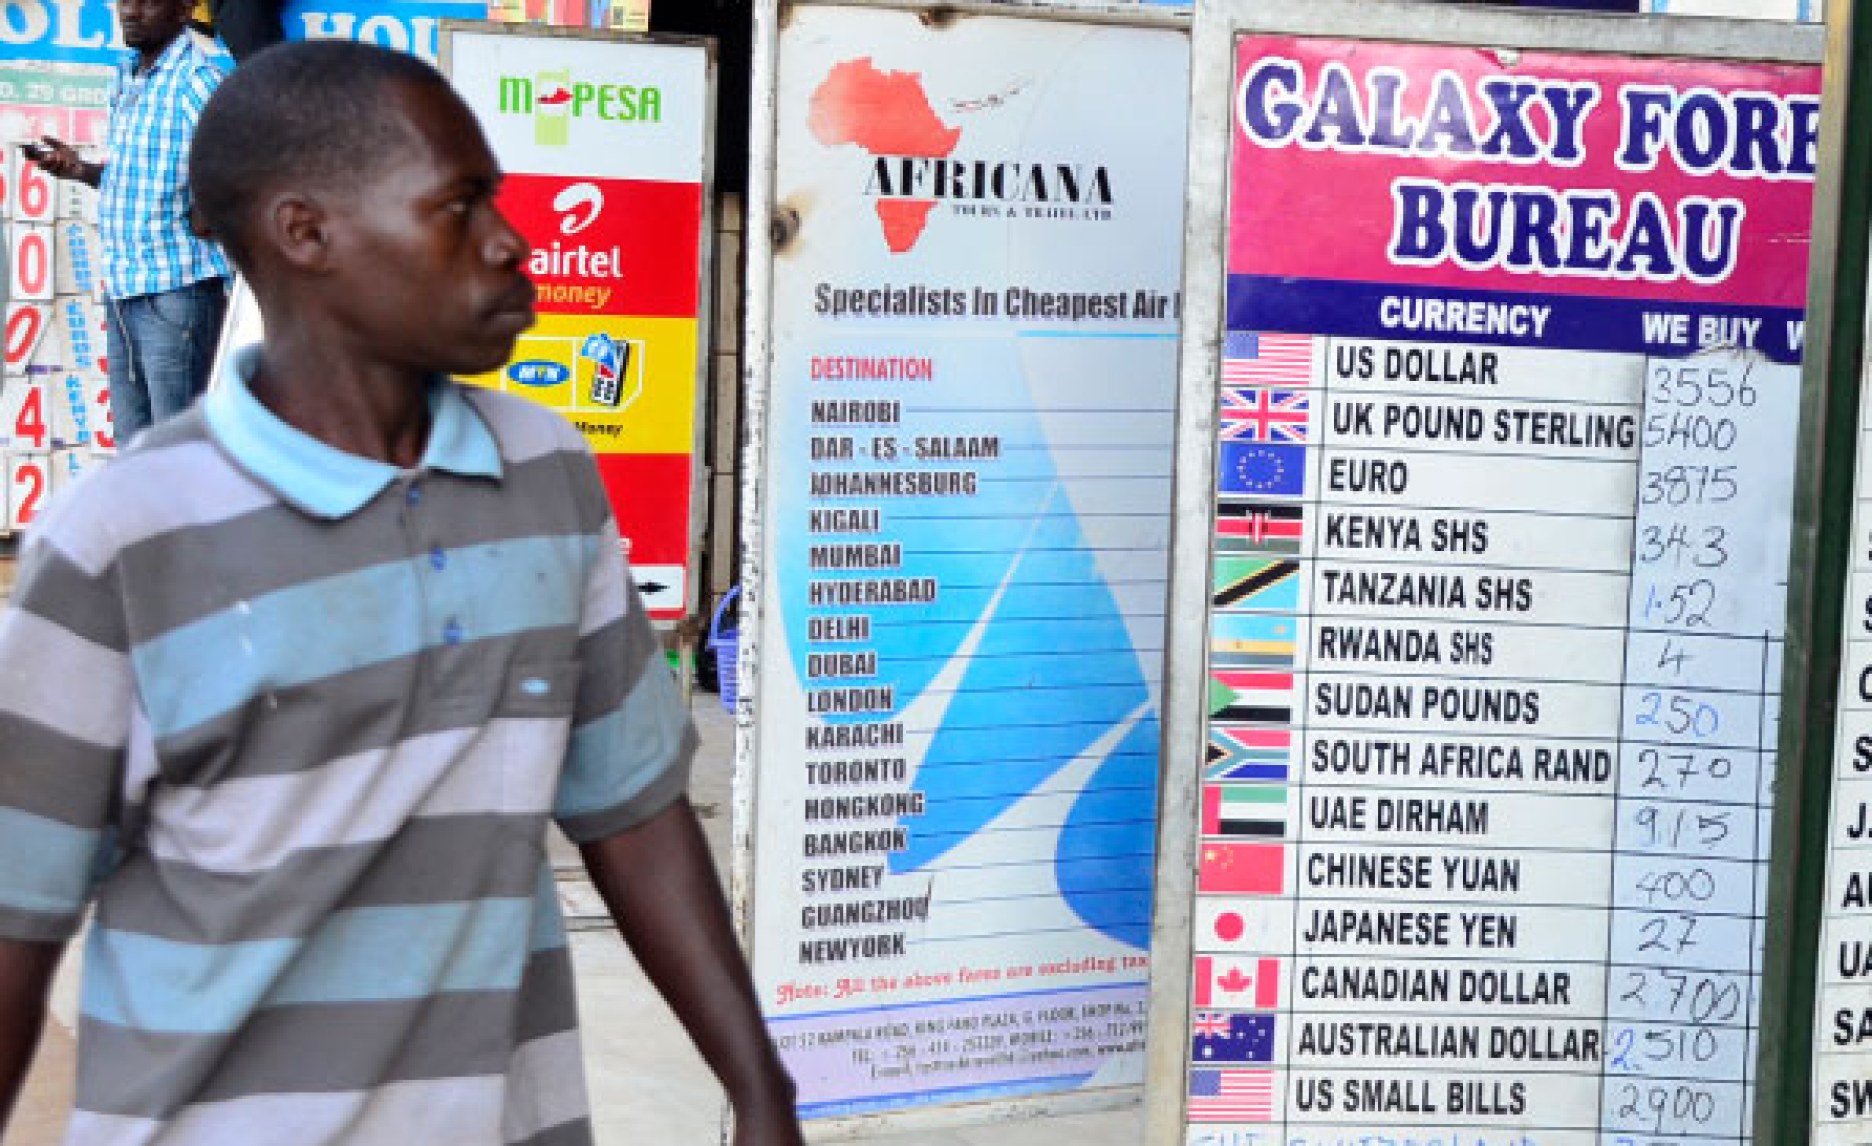 Yonna forex gambia opening hours